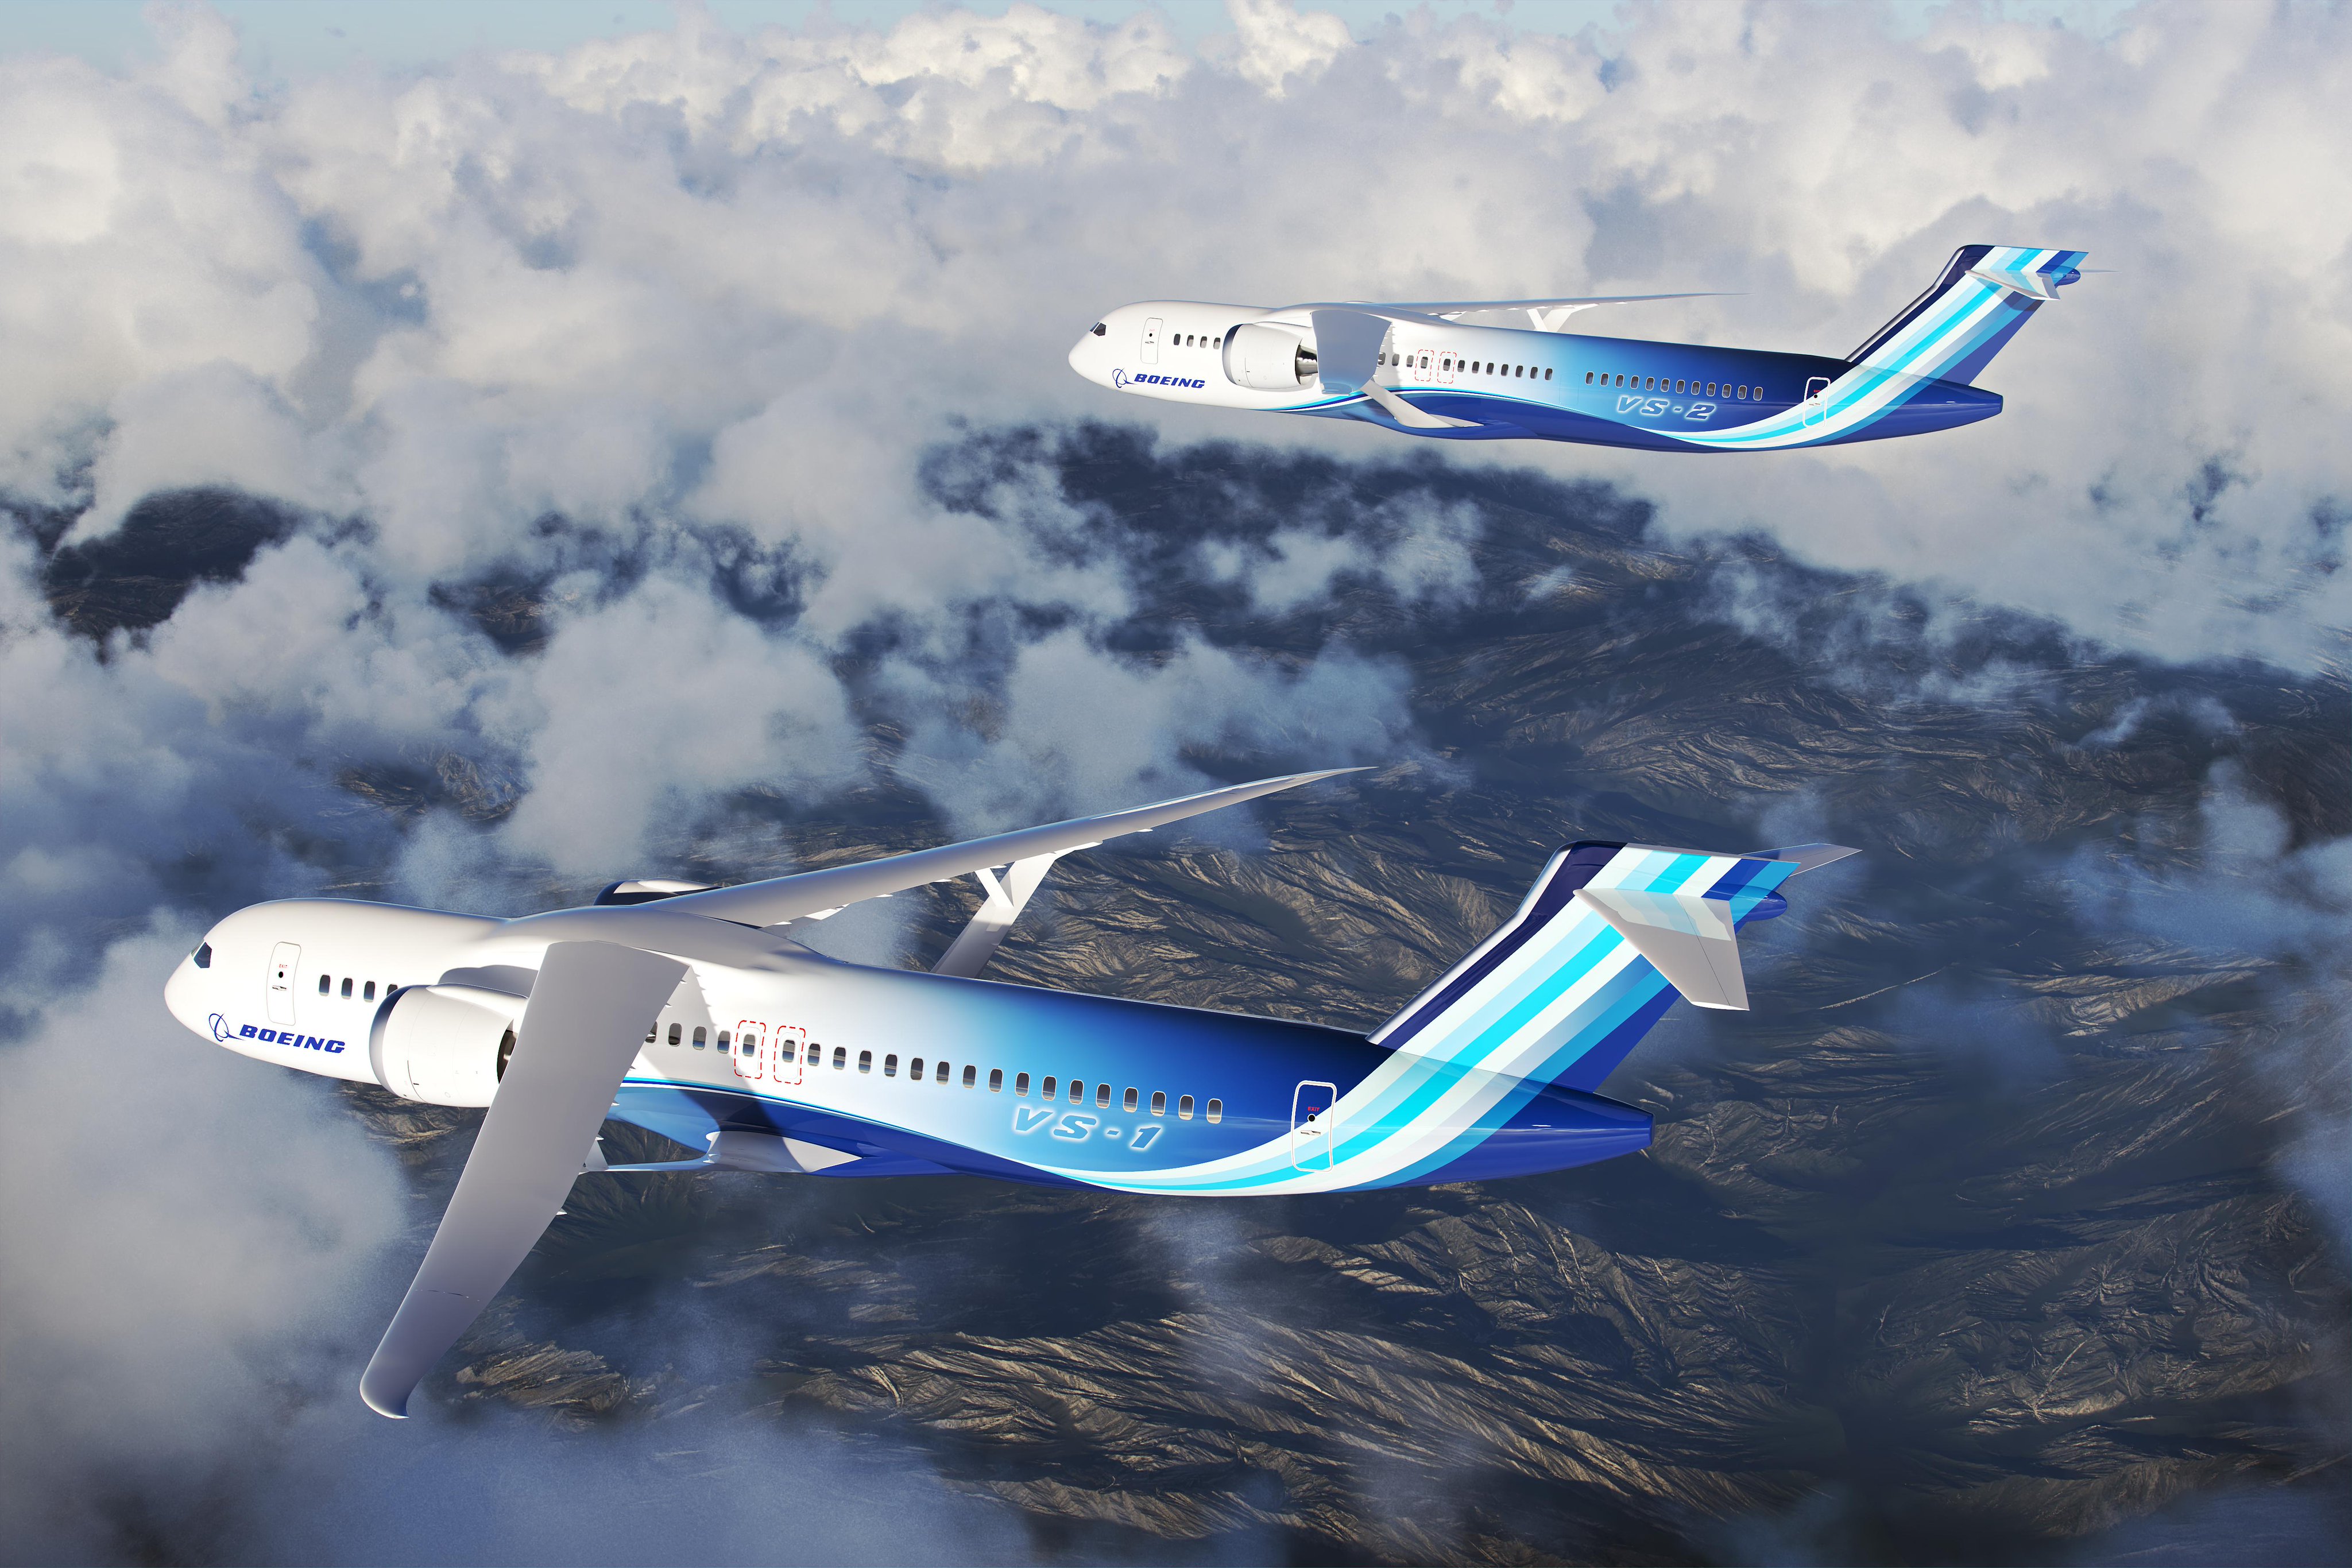 Boeing and NASA join forces to revolutionize single-aisle aircraft technology